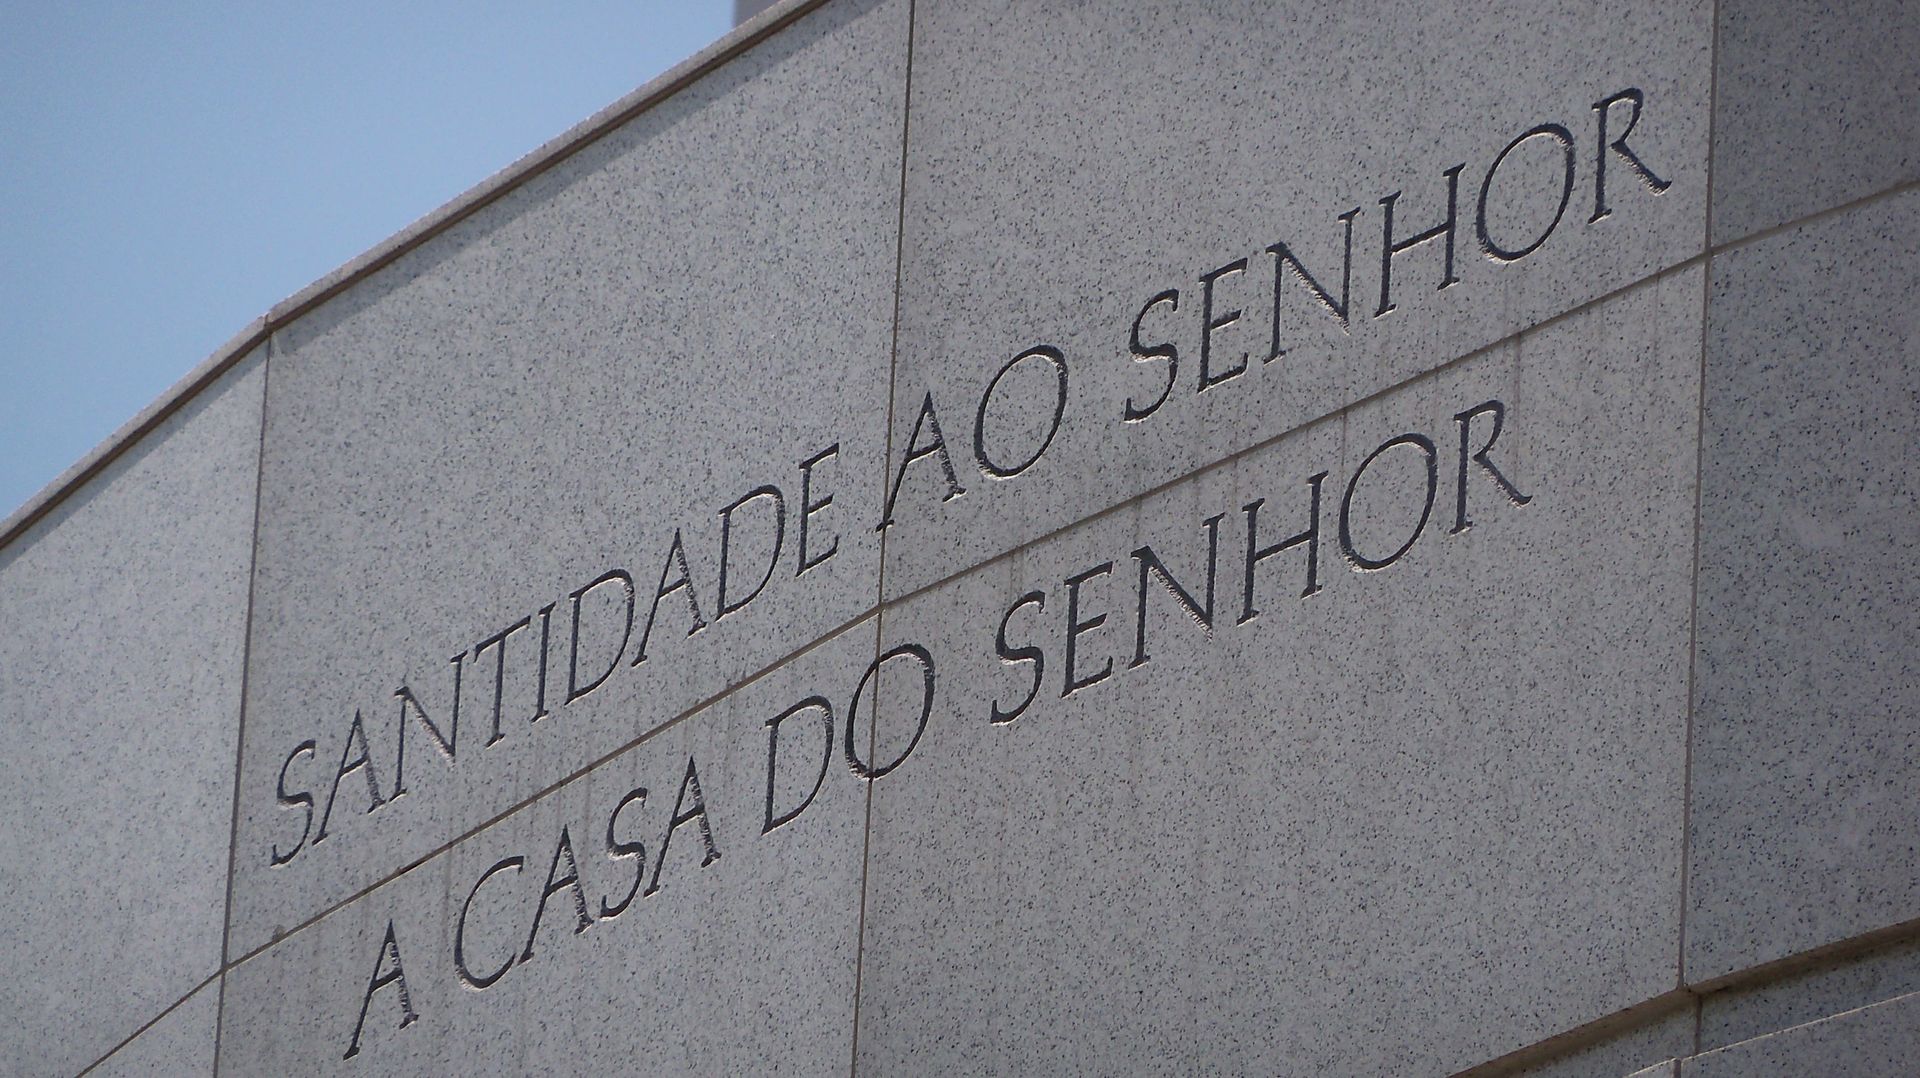 The Recife Brazil Temple inscription, “Holiness to the Lord: The House of the Lord.”